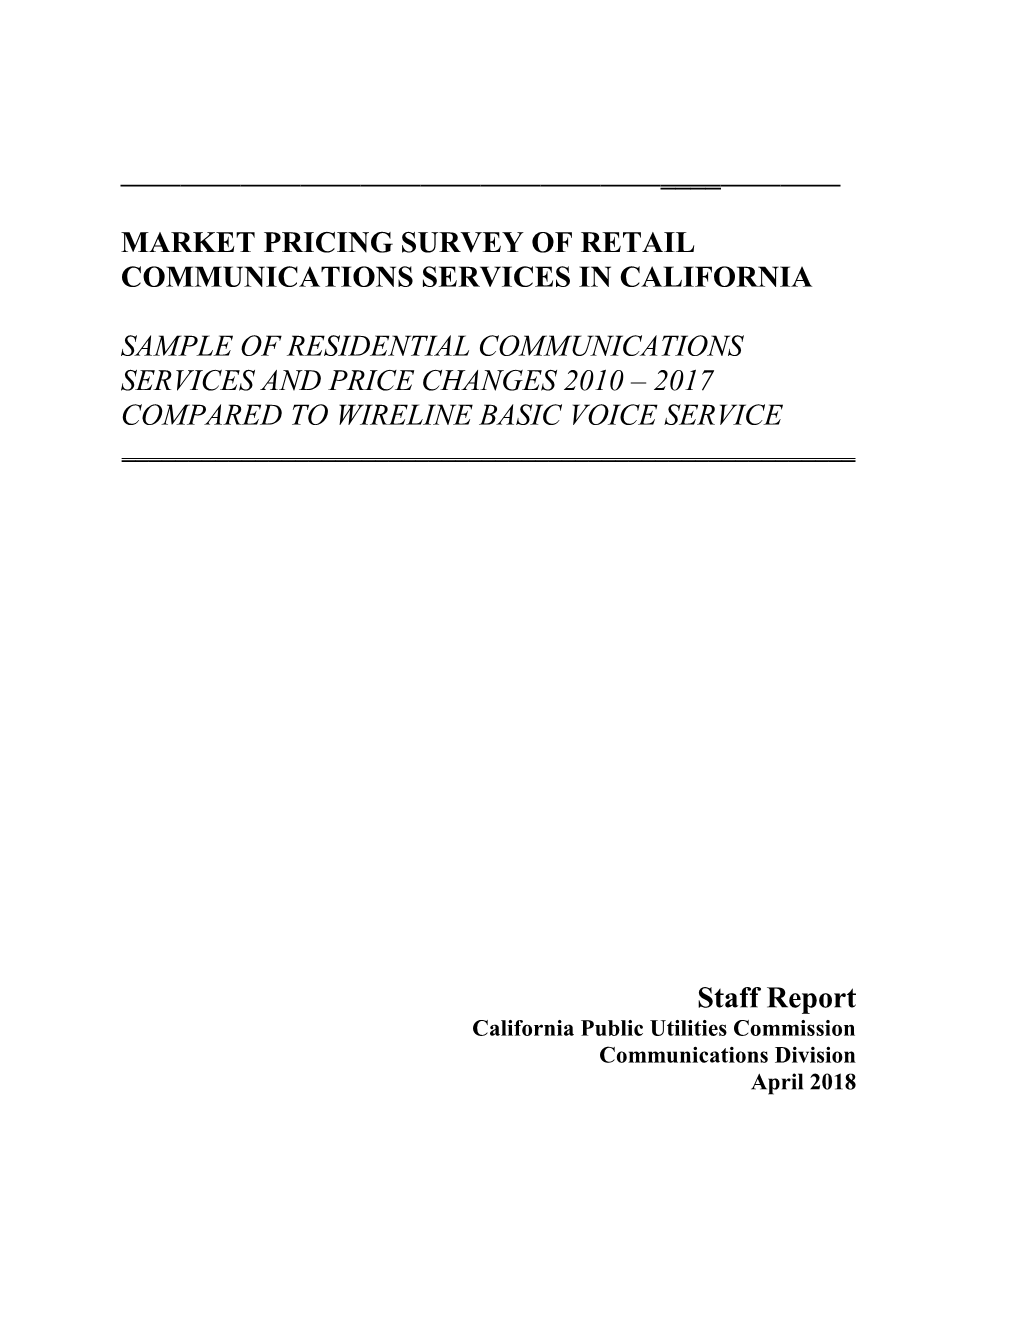 Market Pricing Surveyof Retail Communications Services in California